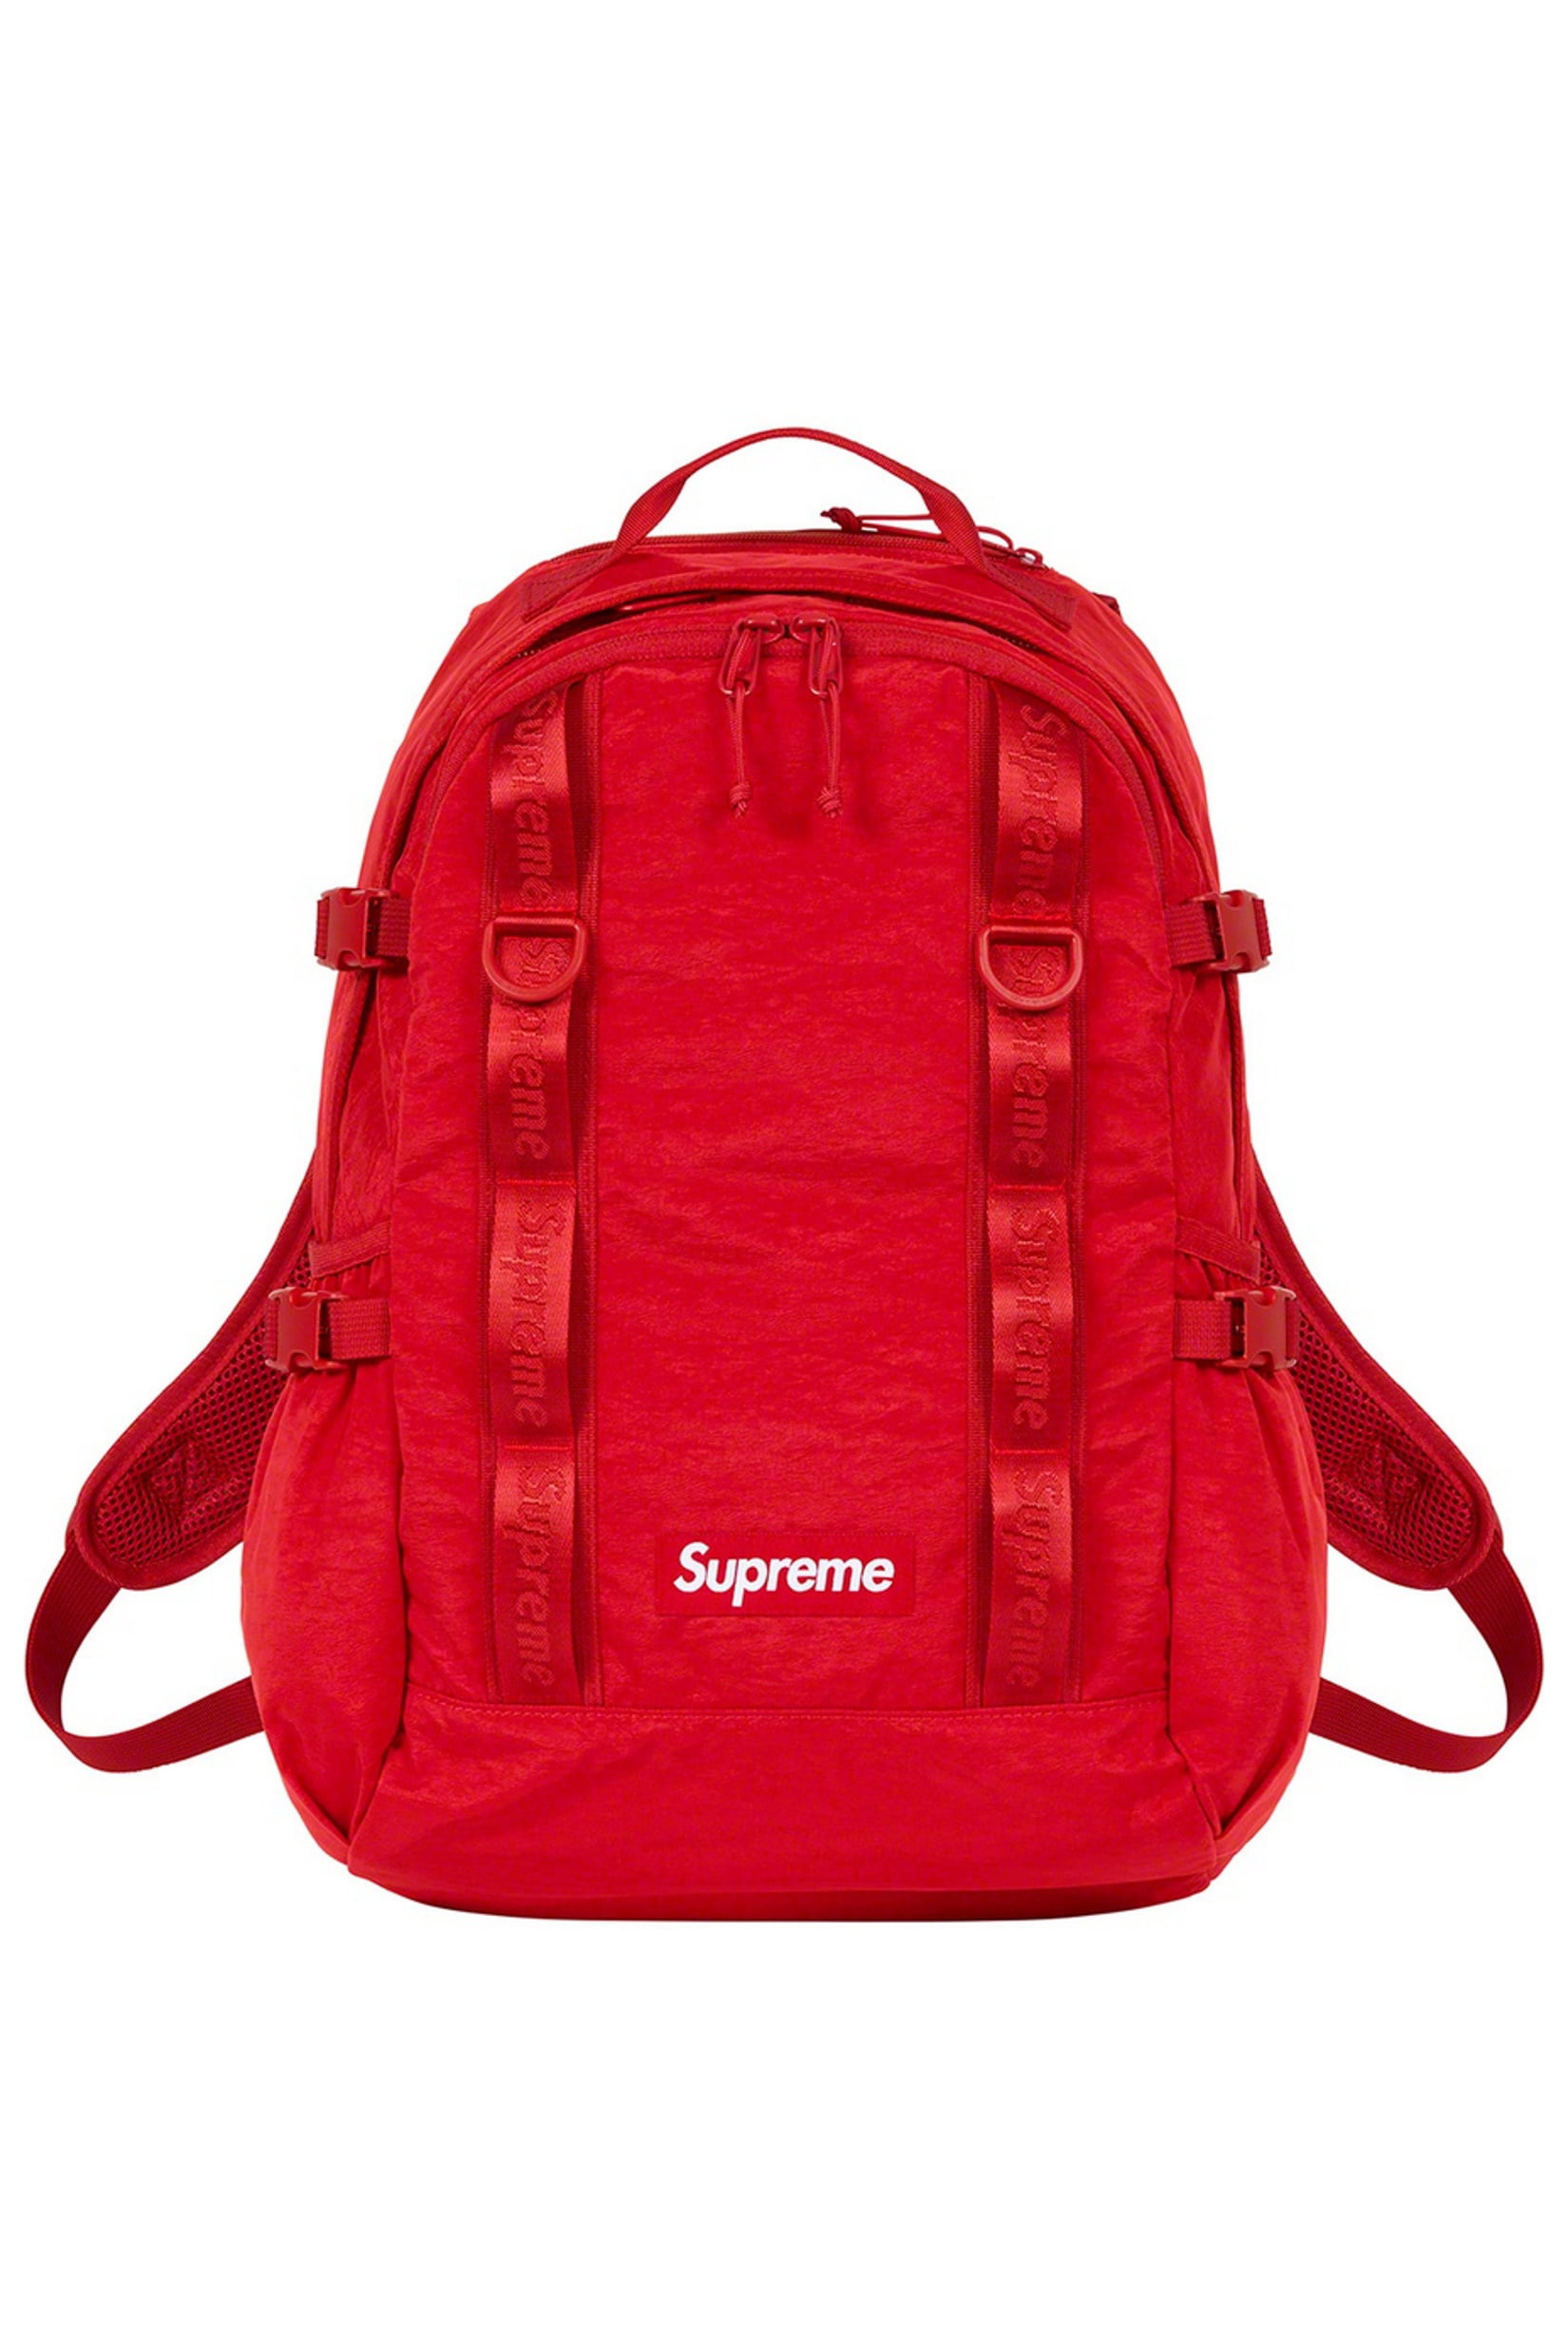 Supreme - Supreme Backpack (FW20) Red - www.paulmartinsmith.com - www.paulmartinsmith.com